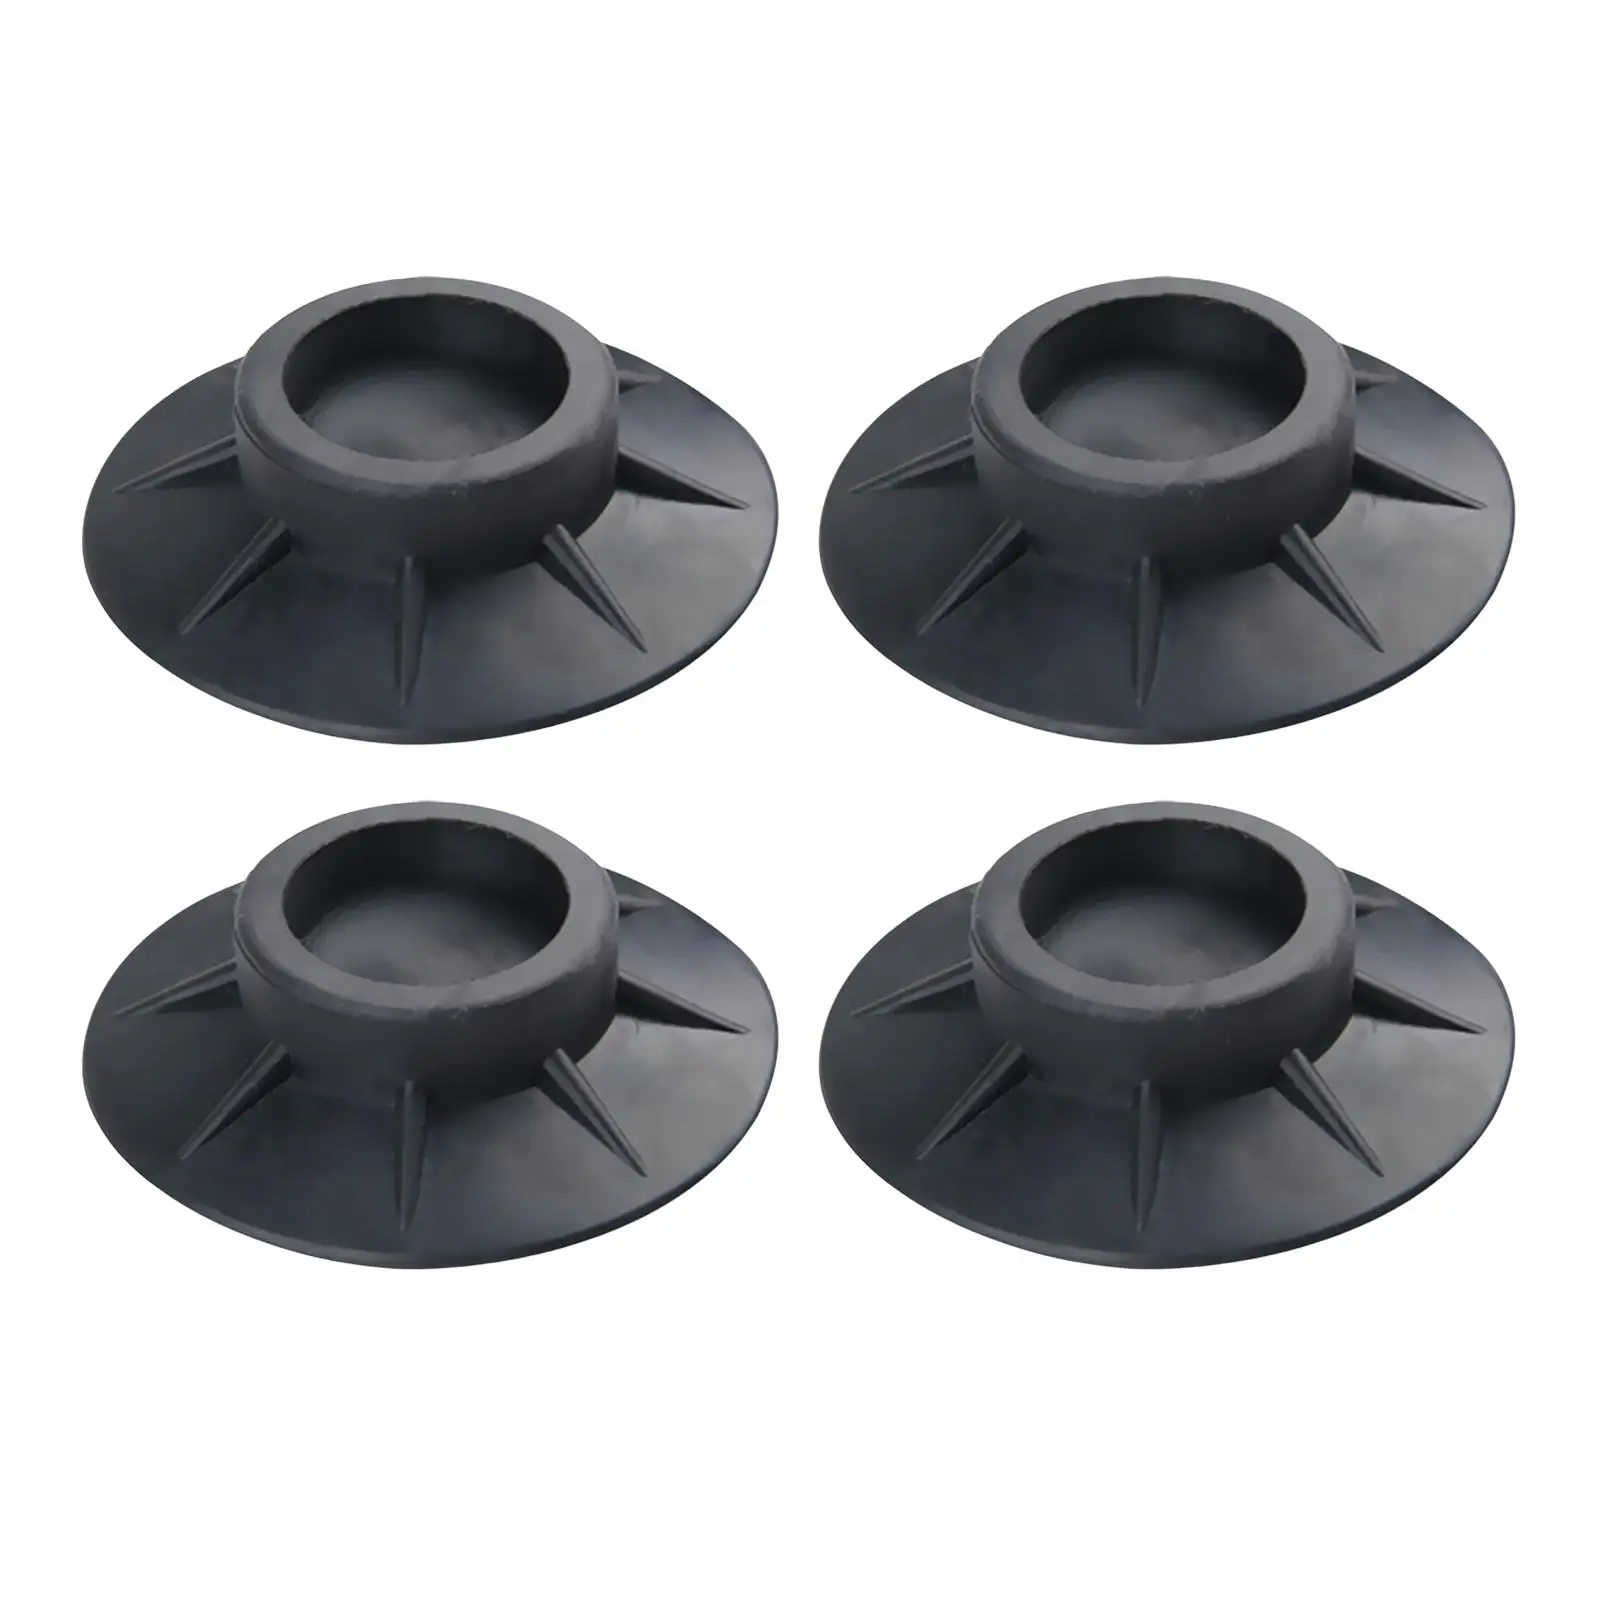 Set of 4 Dryer Pedestals Protection Pad Rubber Covers Slip for Fridge